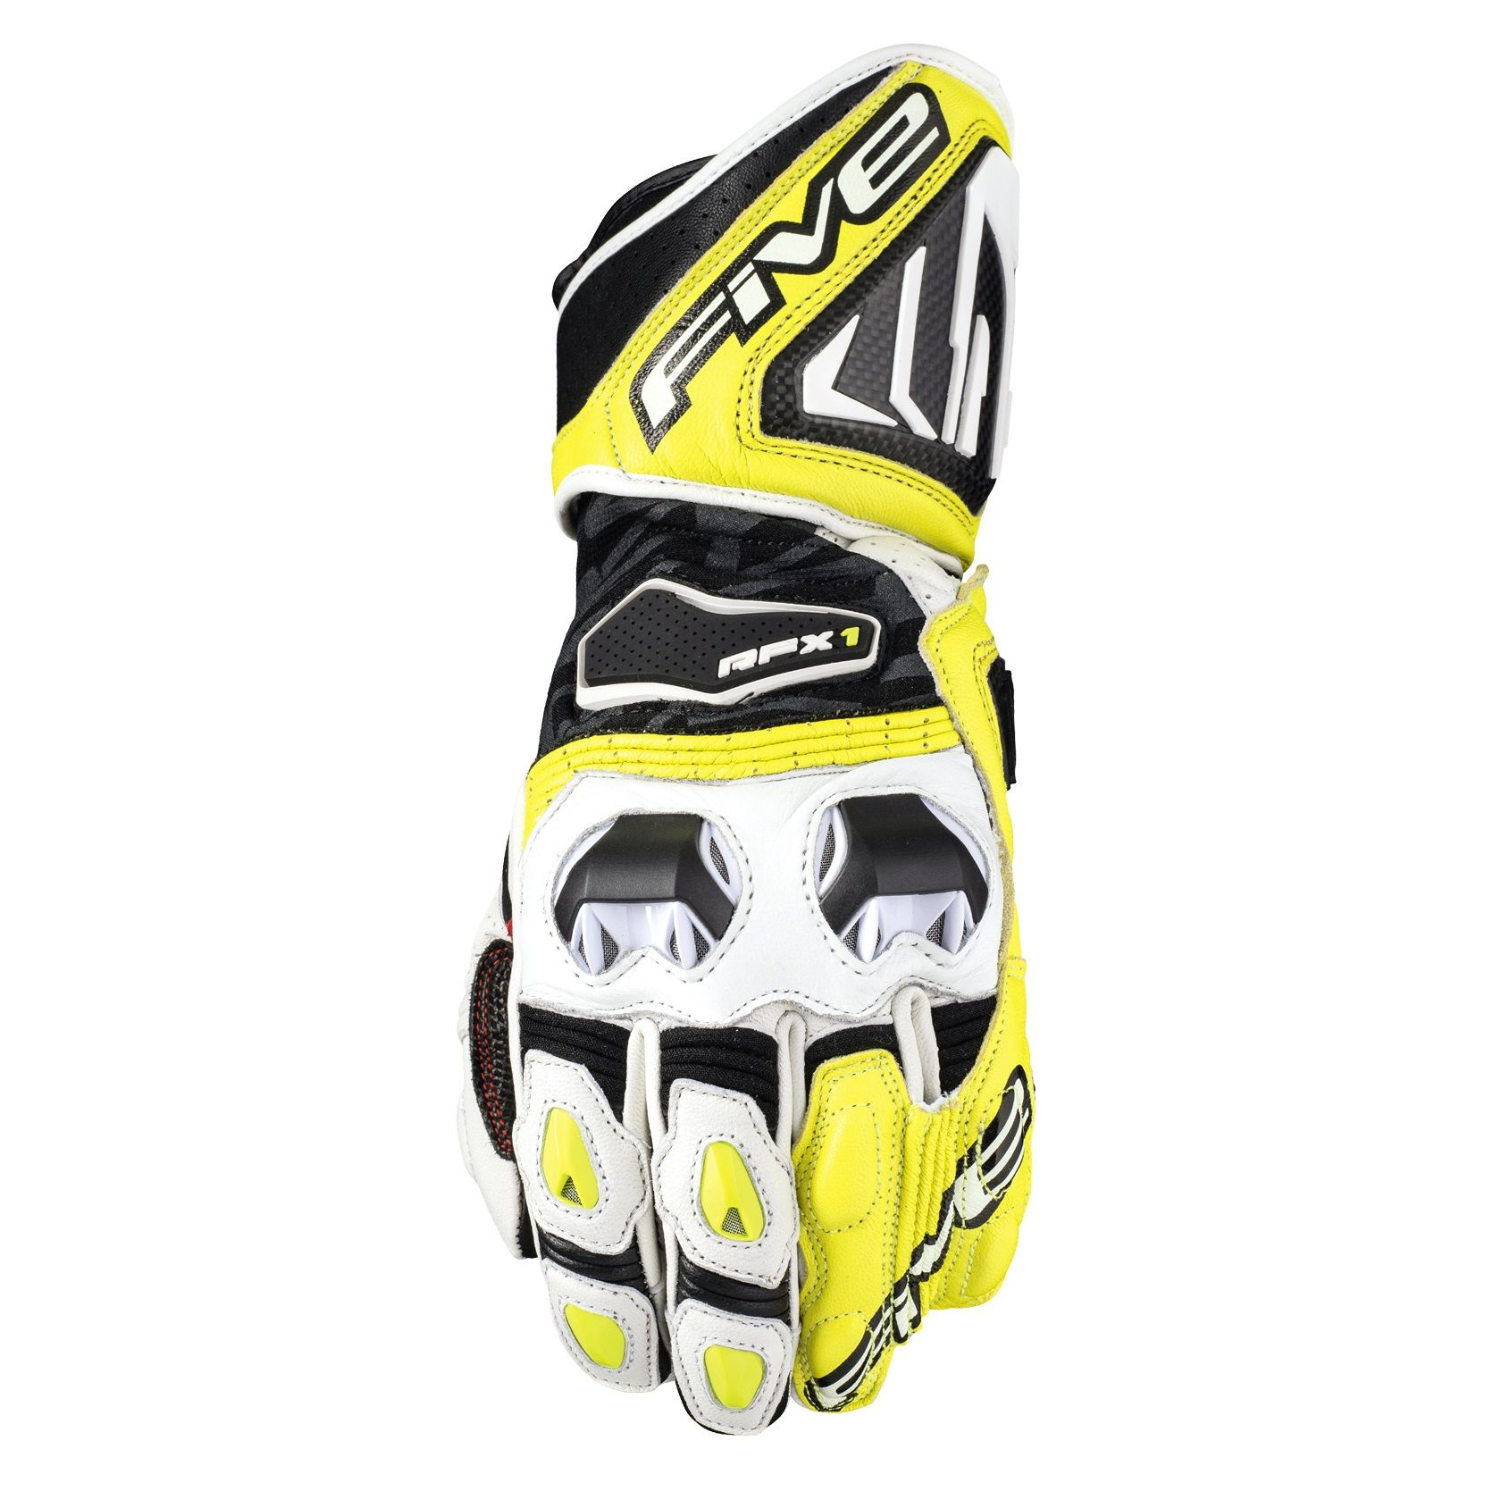 Image of EU Five RFX1 Gloves White Yellow Taille XL